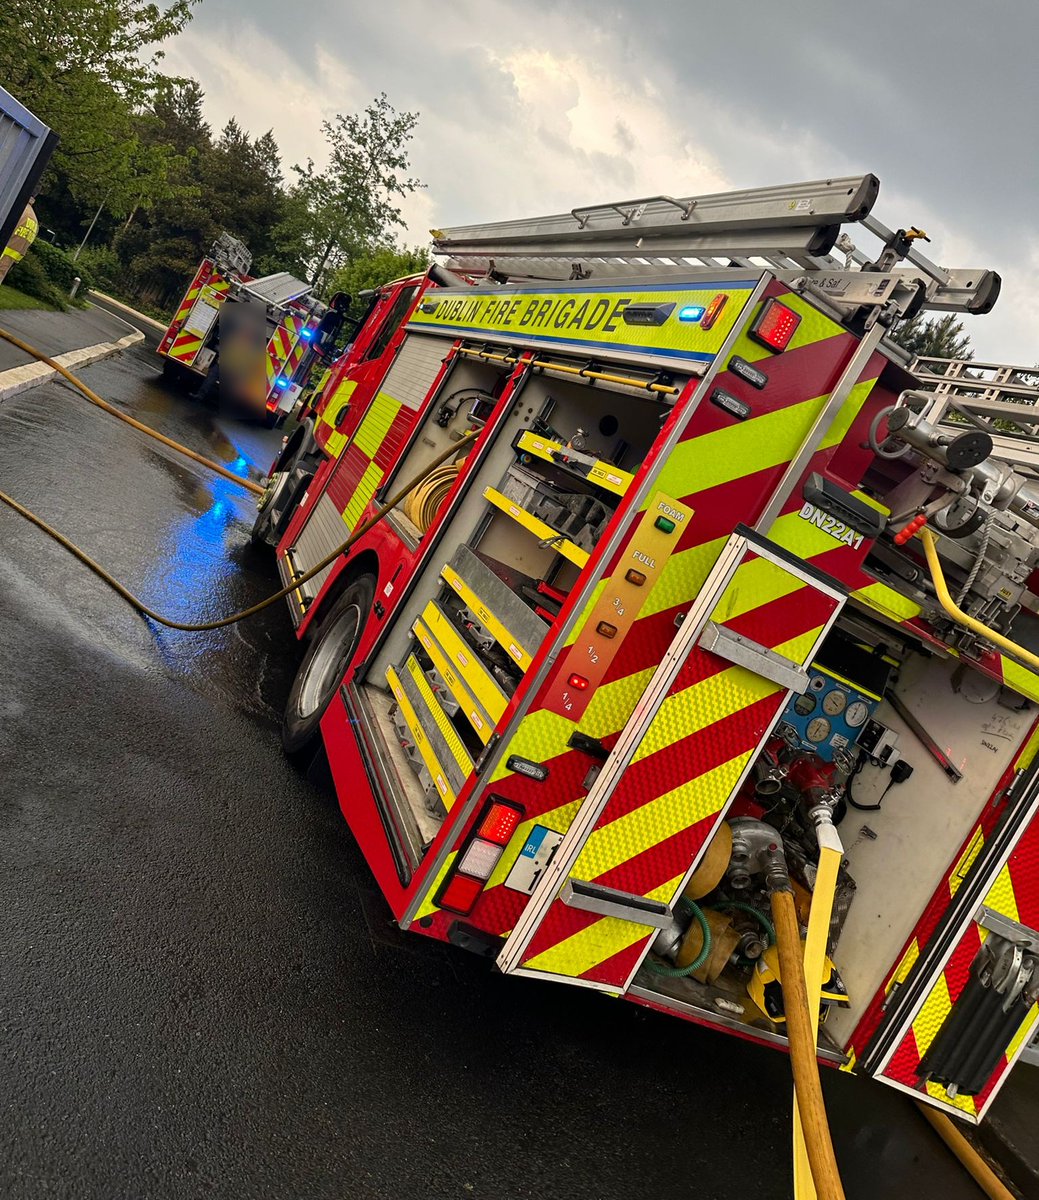 Dun Laoghaire firefighters responded to reports of a e-scooter alight in an apartment this evening. Breathing apparatus teams located and extinguished the fire and ventilated the building.